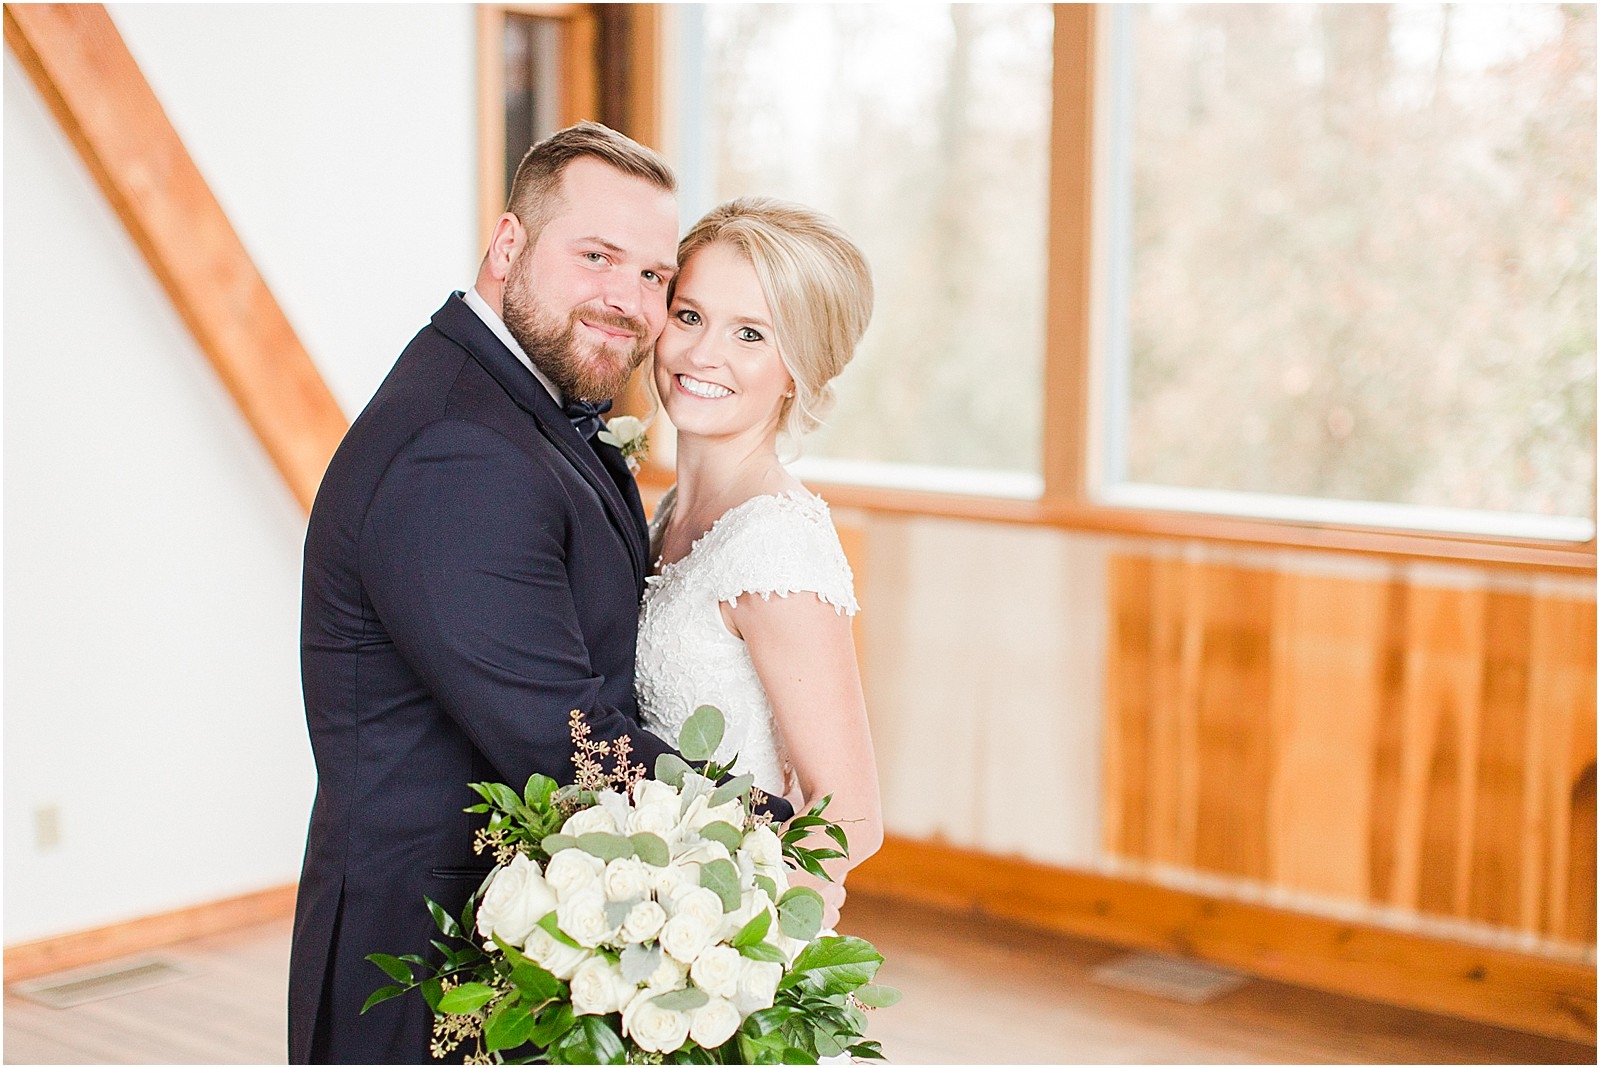 A Classic Winter Wedding in New Harmony | Rachel and Ryan | Bret and Brandie Photography 0094.jpg